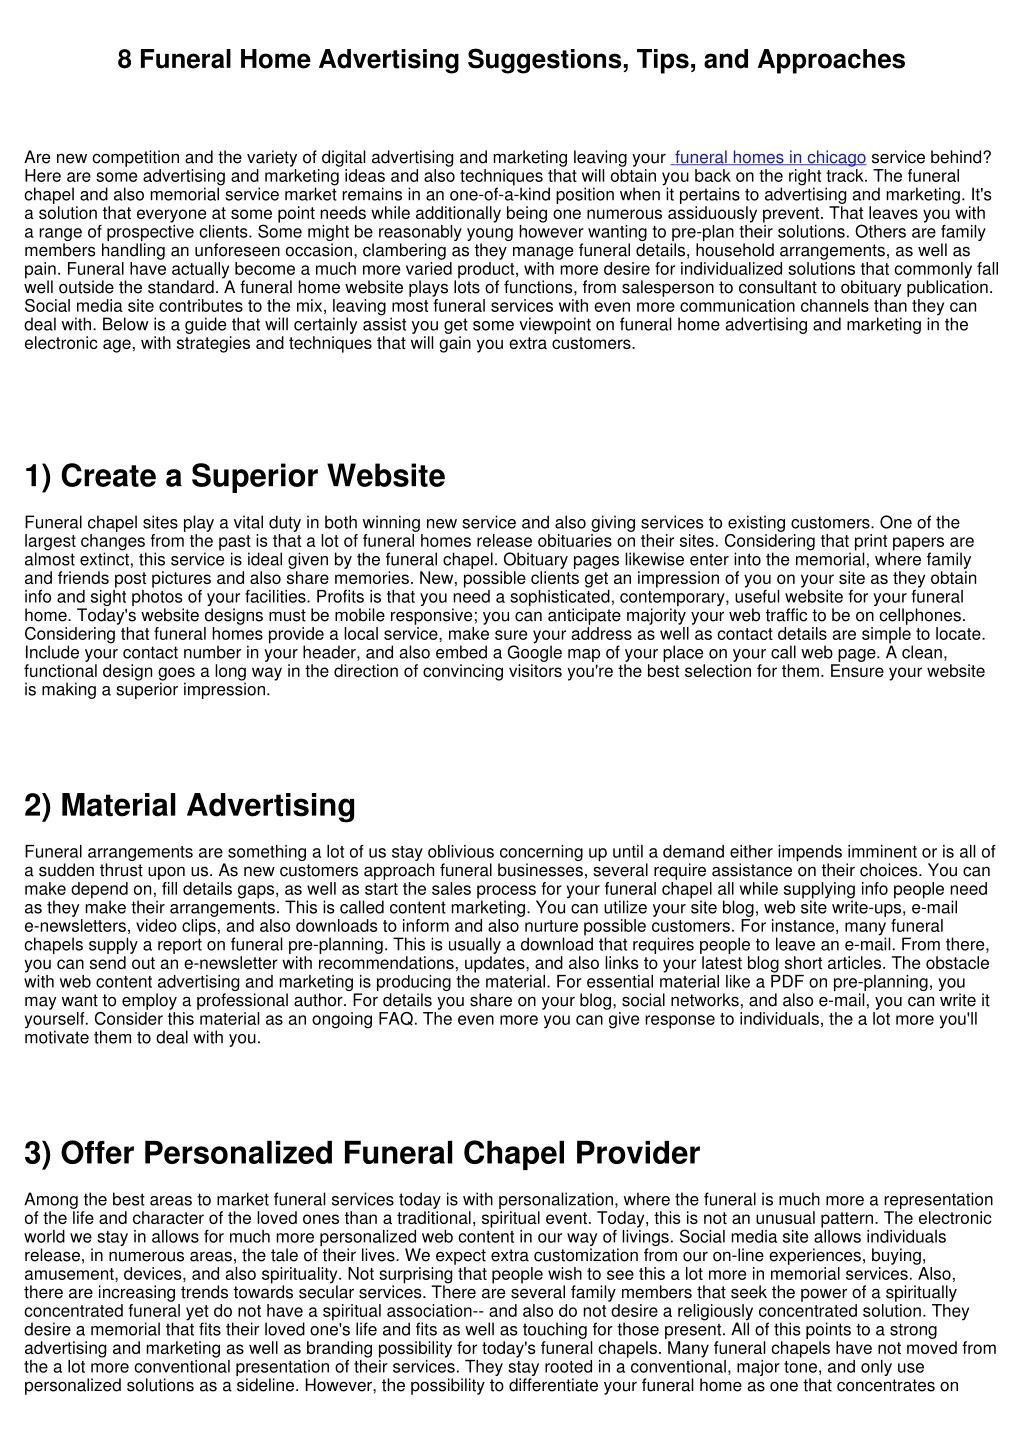 8 funeral home advertising suggestions tips